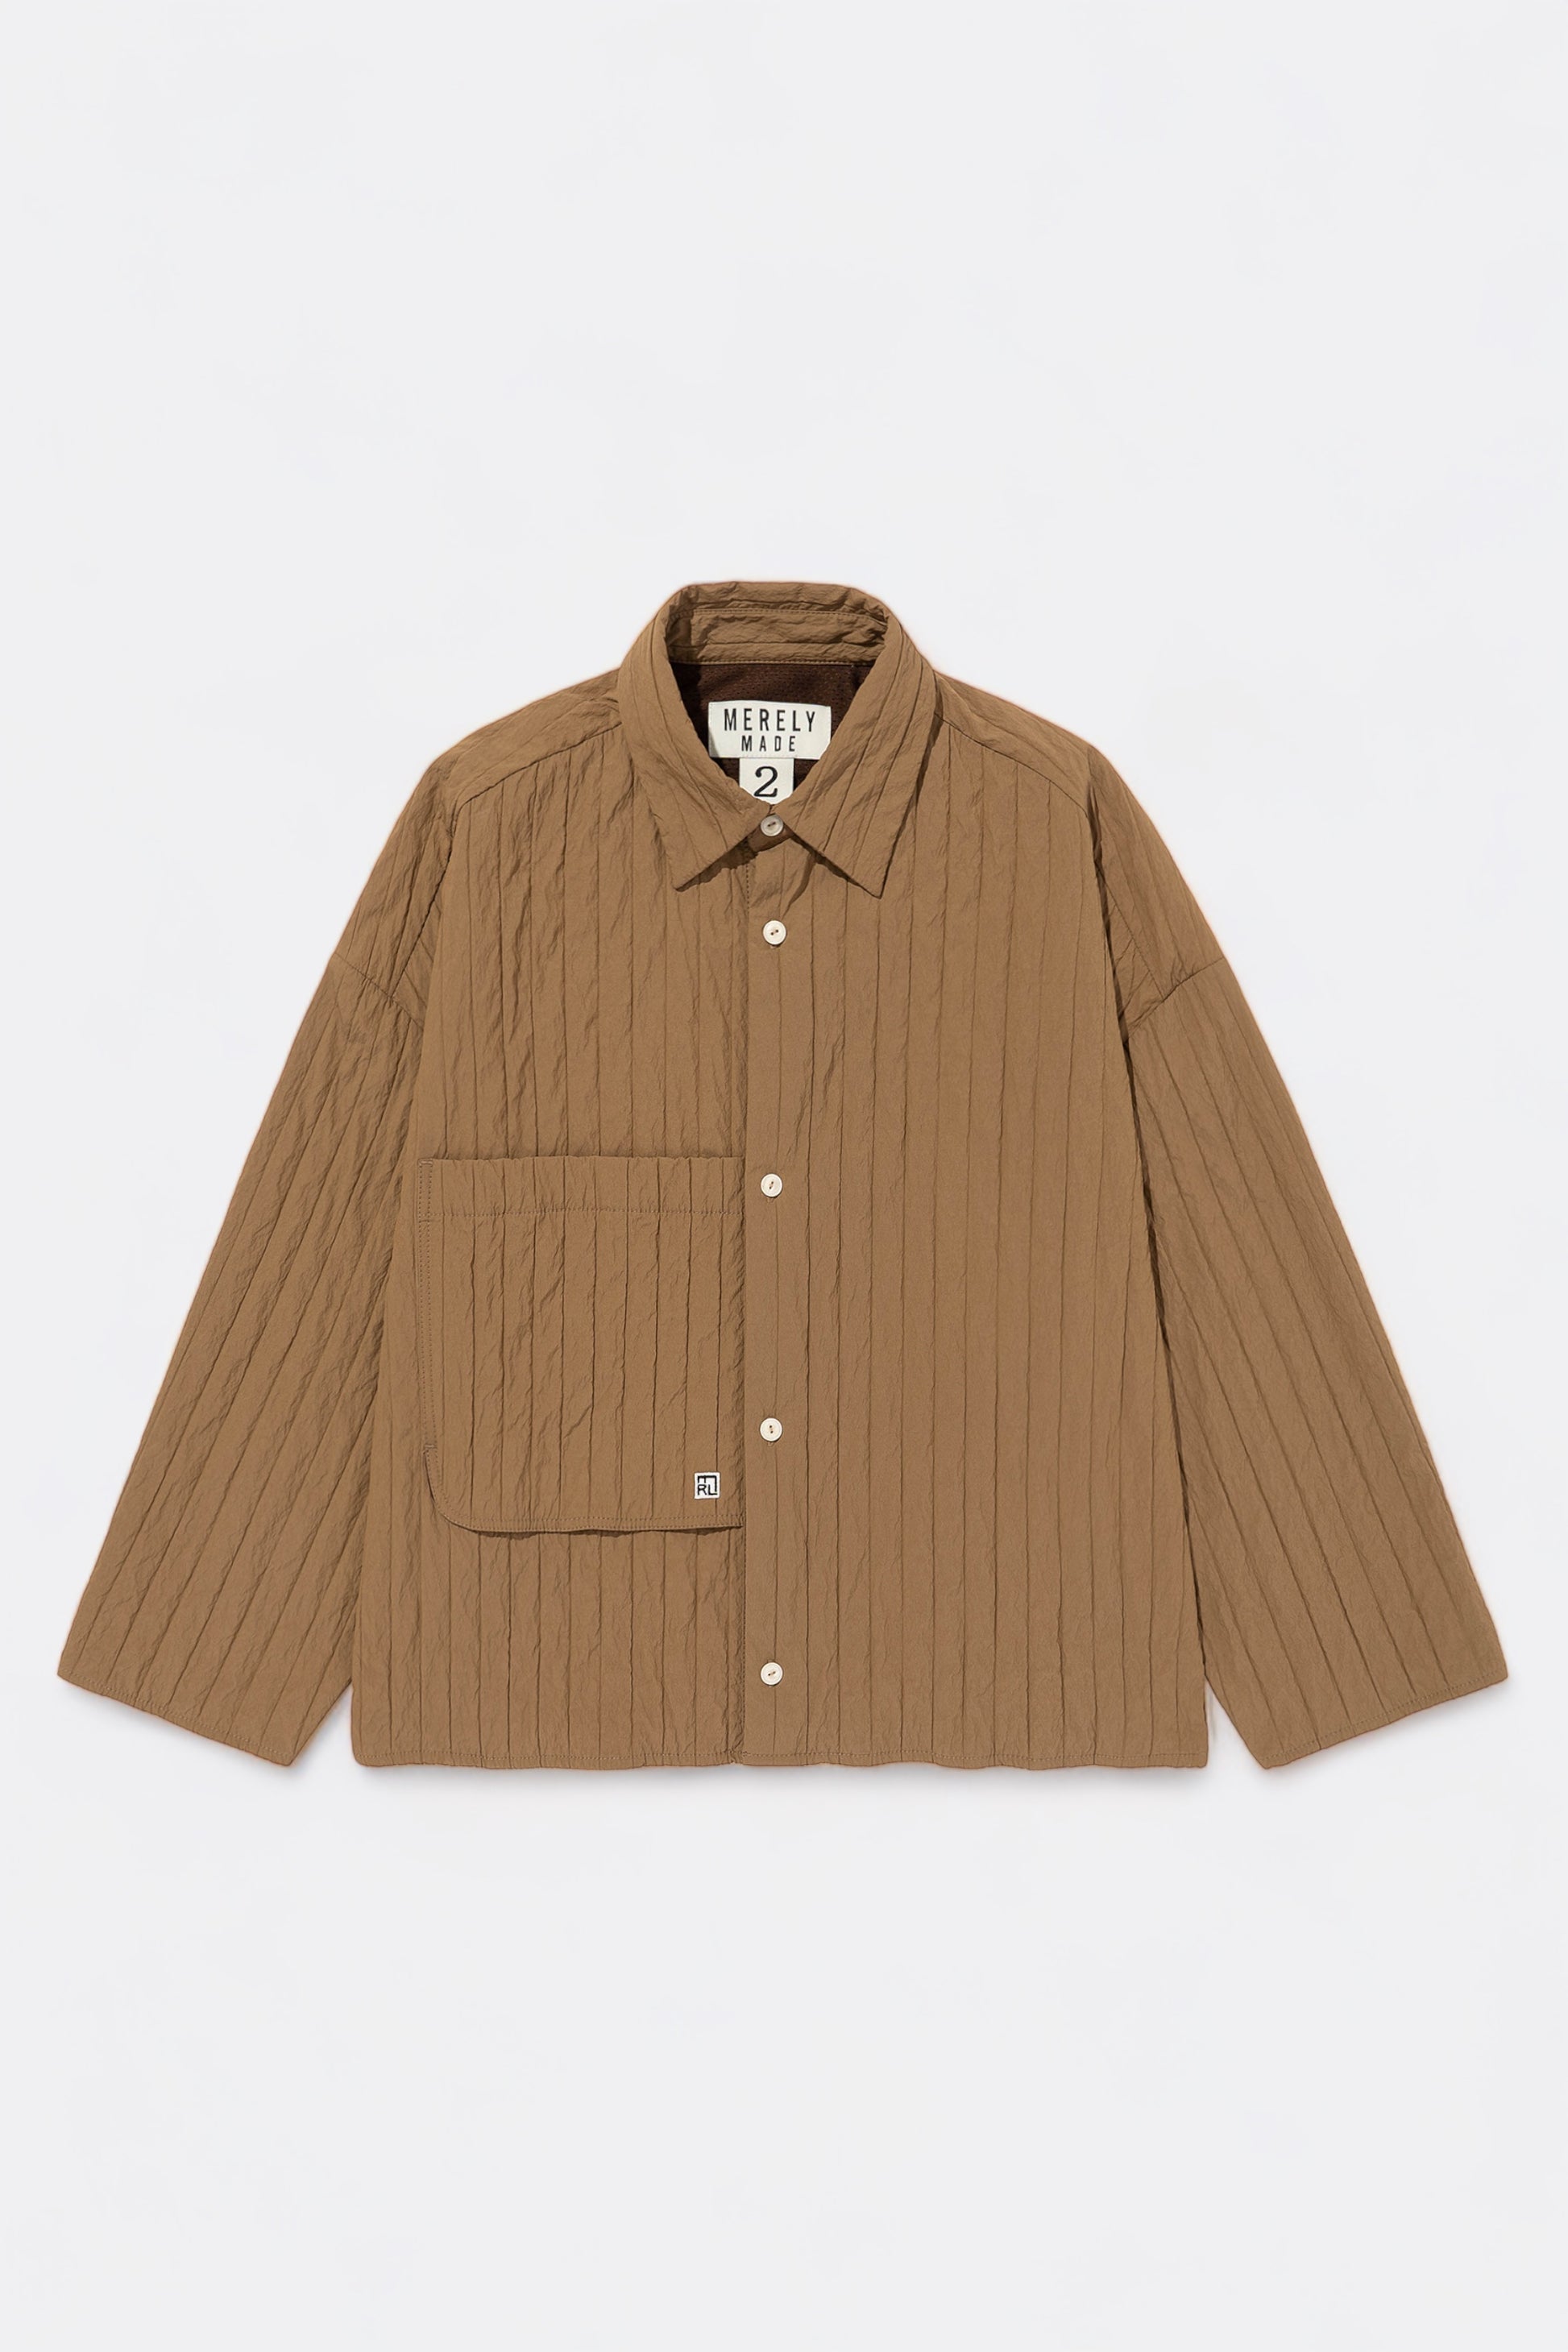 Merely Made - Merely Quilted Cropped Shirt (Sage Brown)